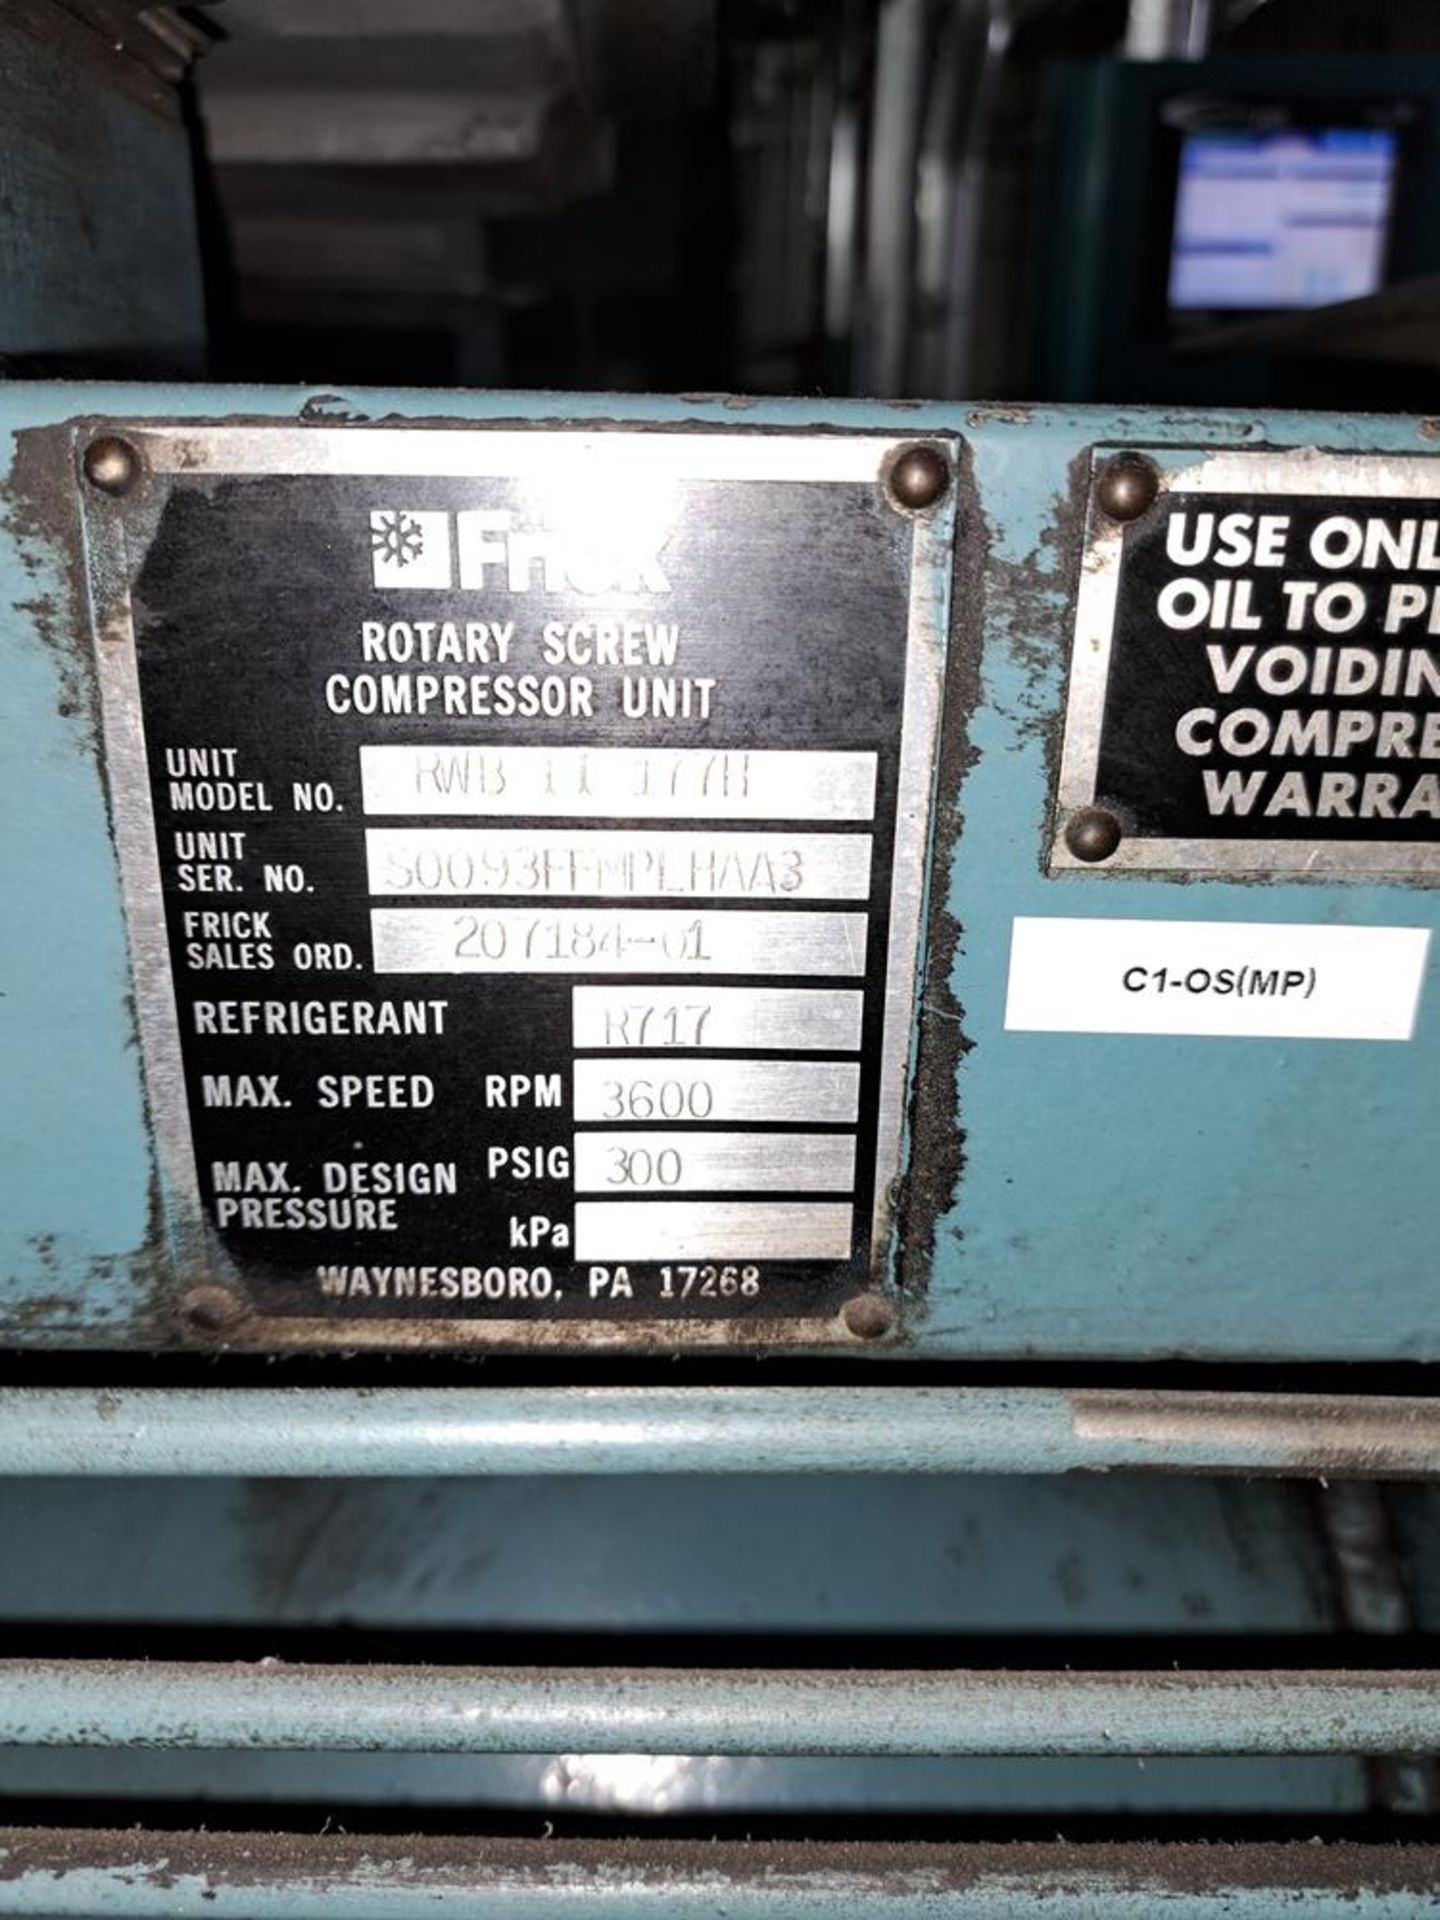 Frick Model RBWII+177H, 400 H.P. Ammonia Rotary Screw Compressor, S/N S0093FFMPLHAA3: Required - Image 7 of 11